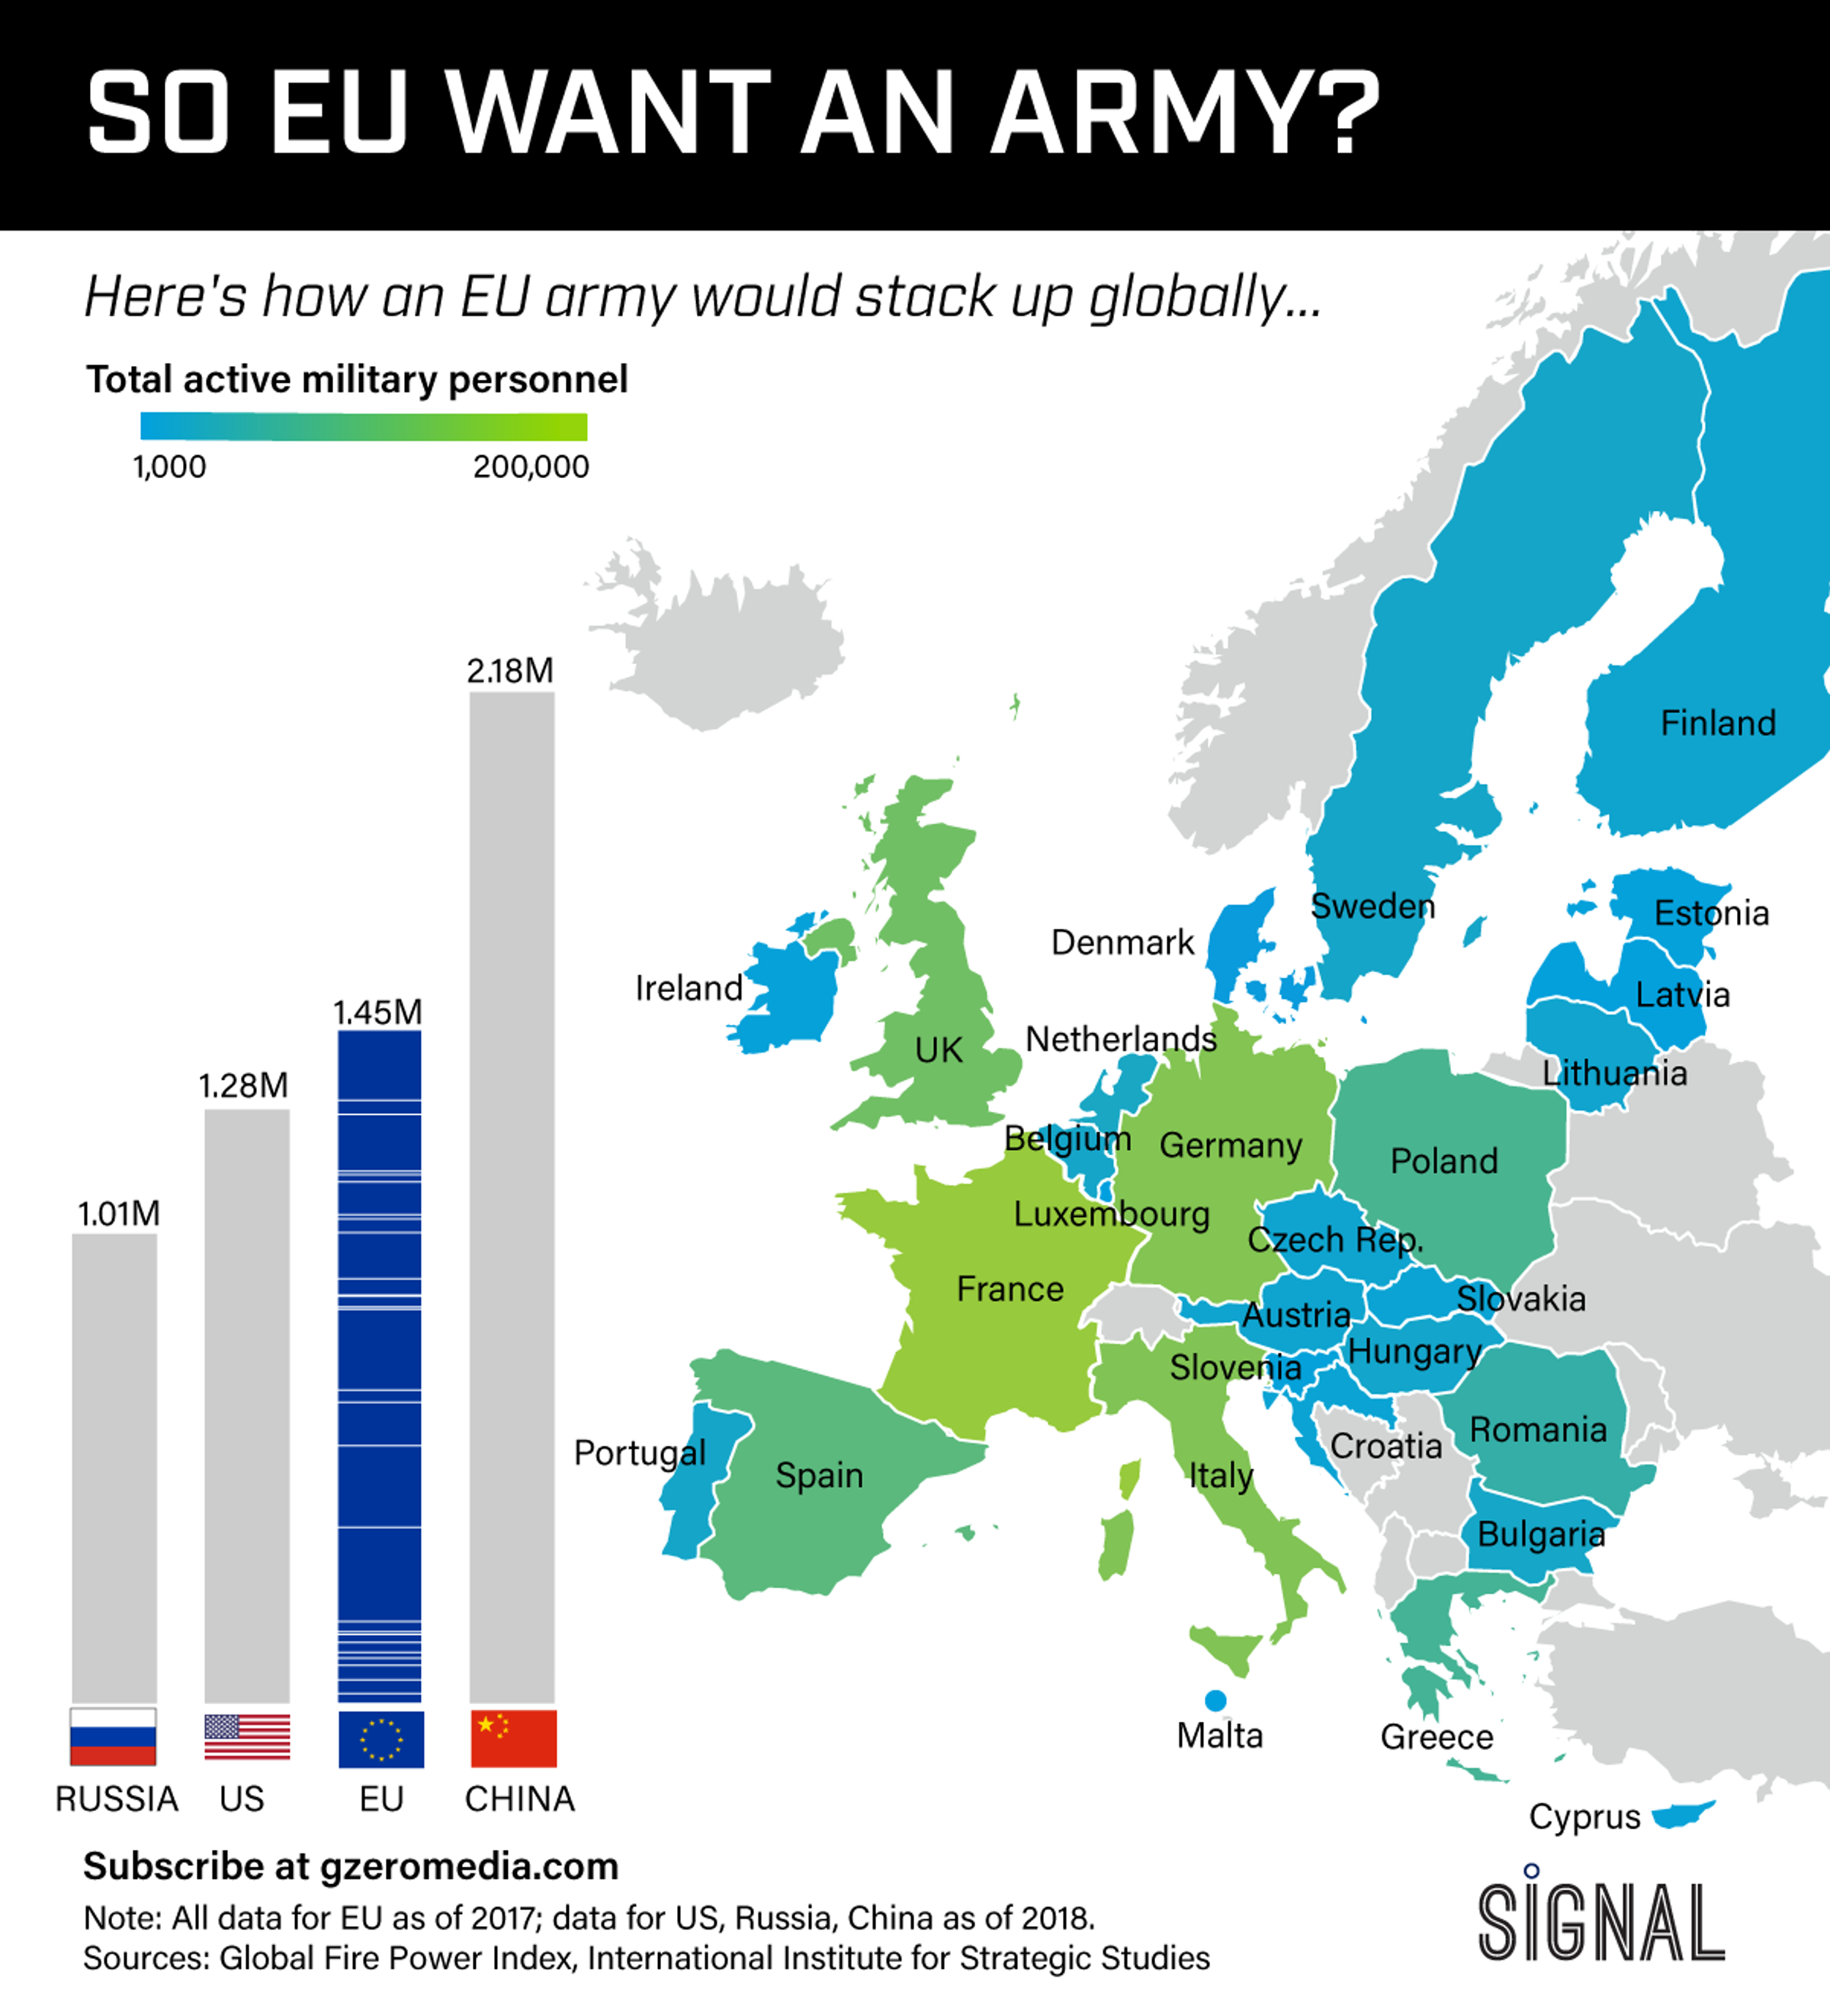 GRAPHIC TRUTH: SO EU WANT AN ARMY?